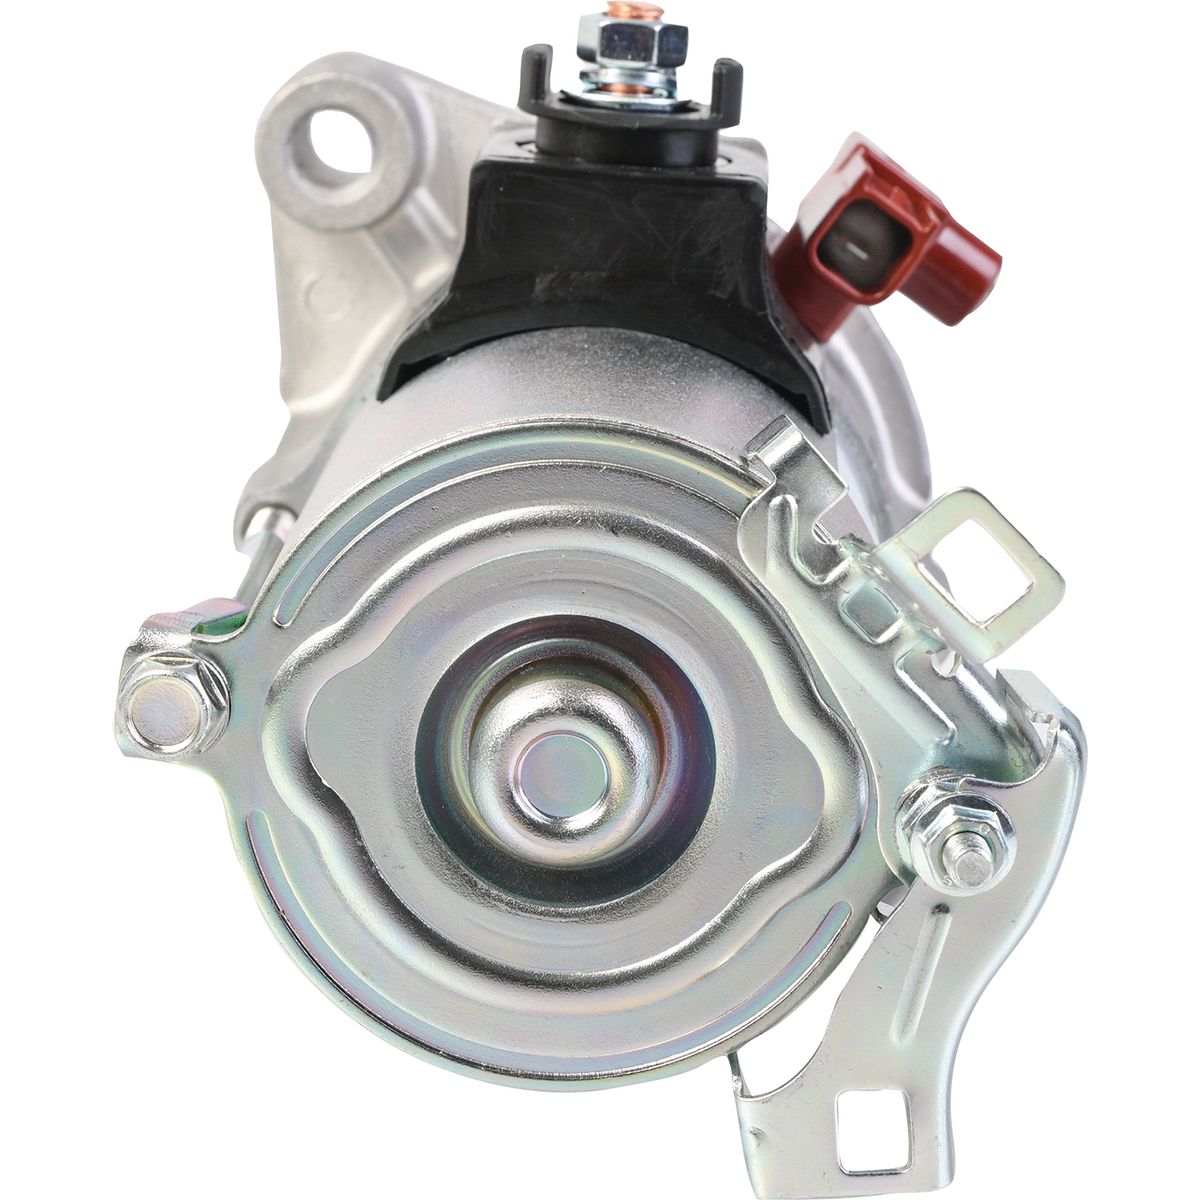 Hover to zoom Have one to sell? Sell it yourself Brand New Starter Motor For Honda CRV Accord Euro Odyssey 4cyl 2.4L (ROUND PLUG)